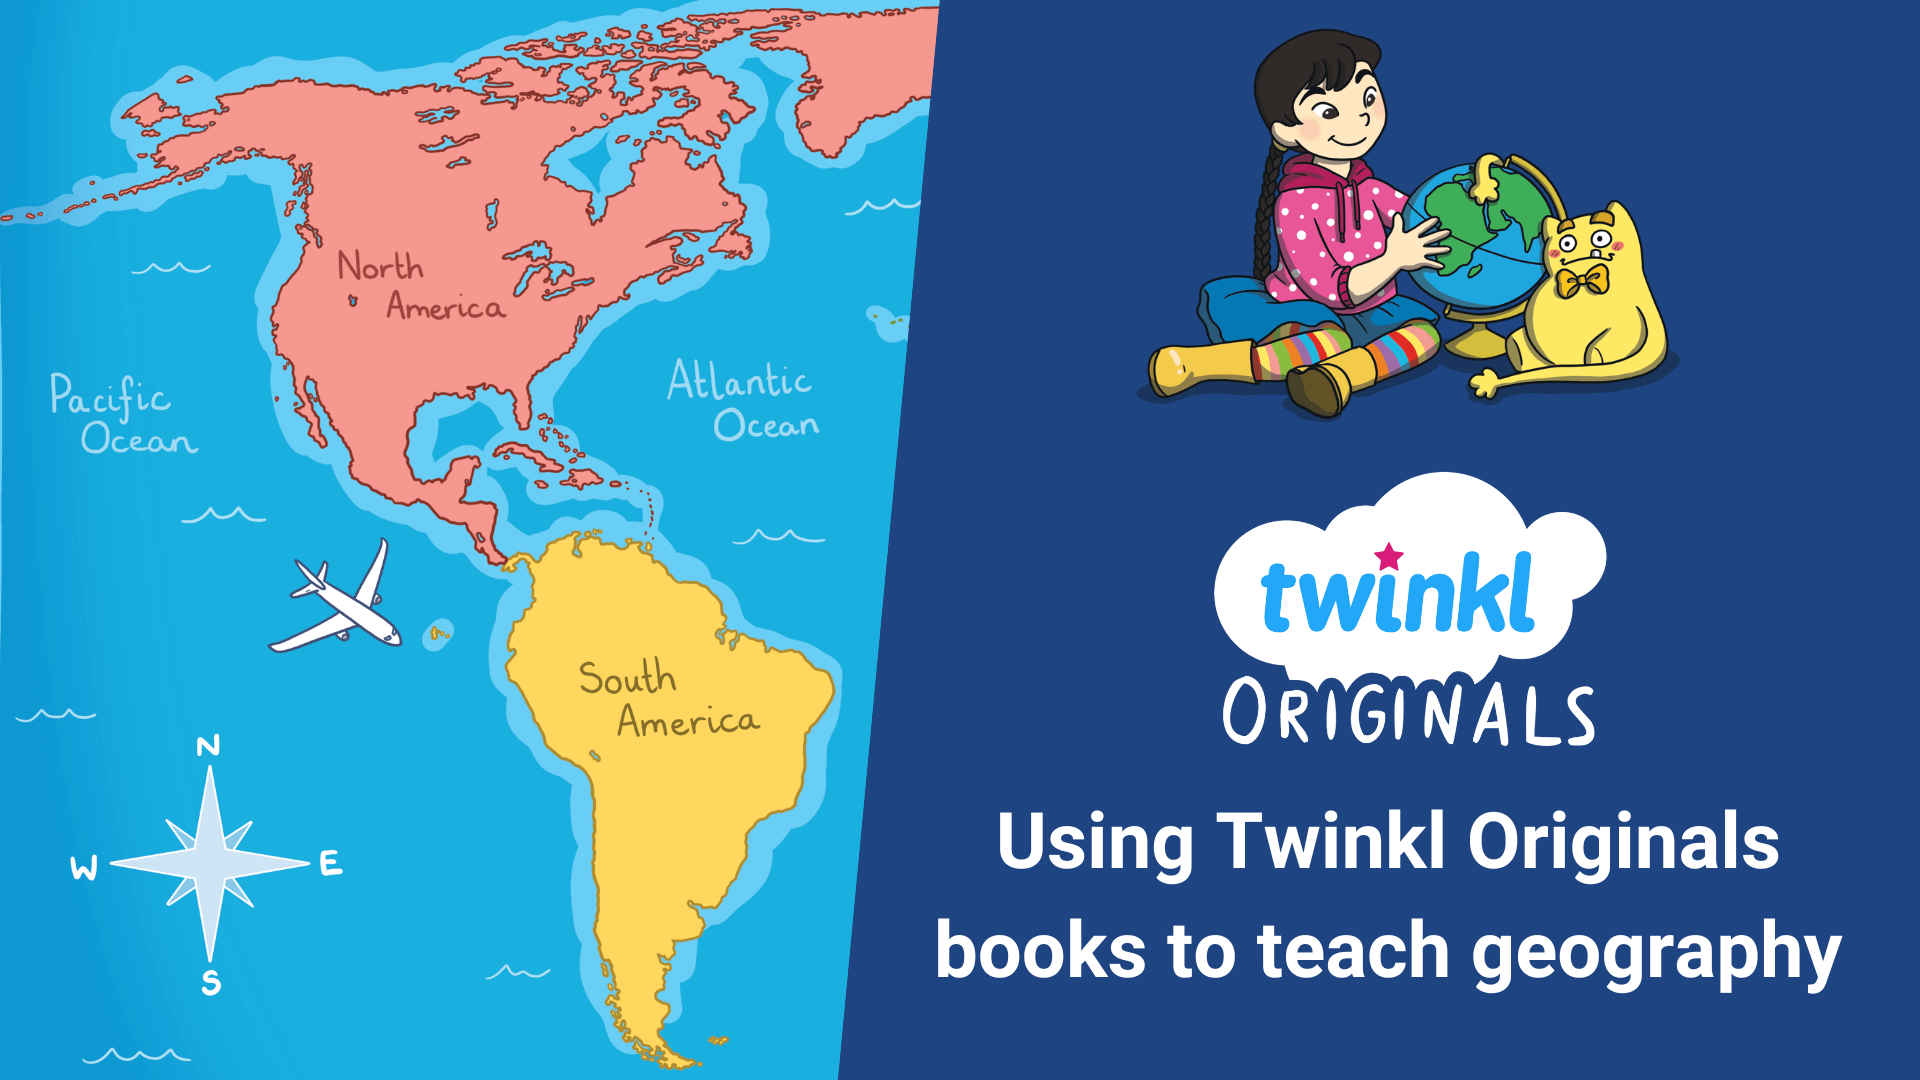 Using Twinkl Originals Books to Teach Geography - Twinkl